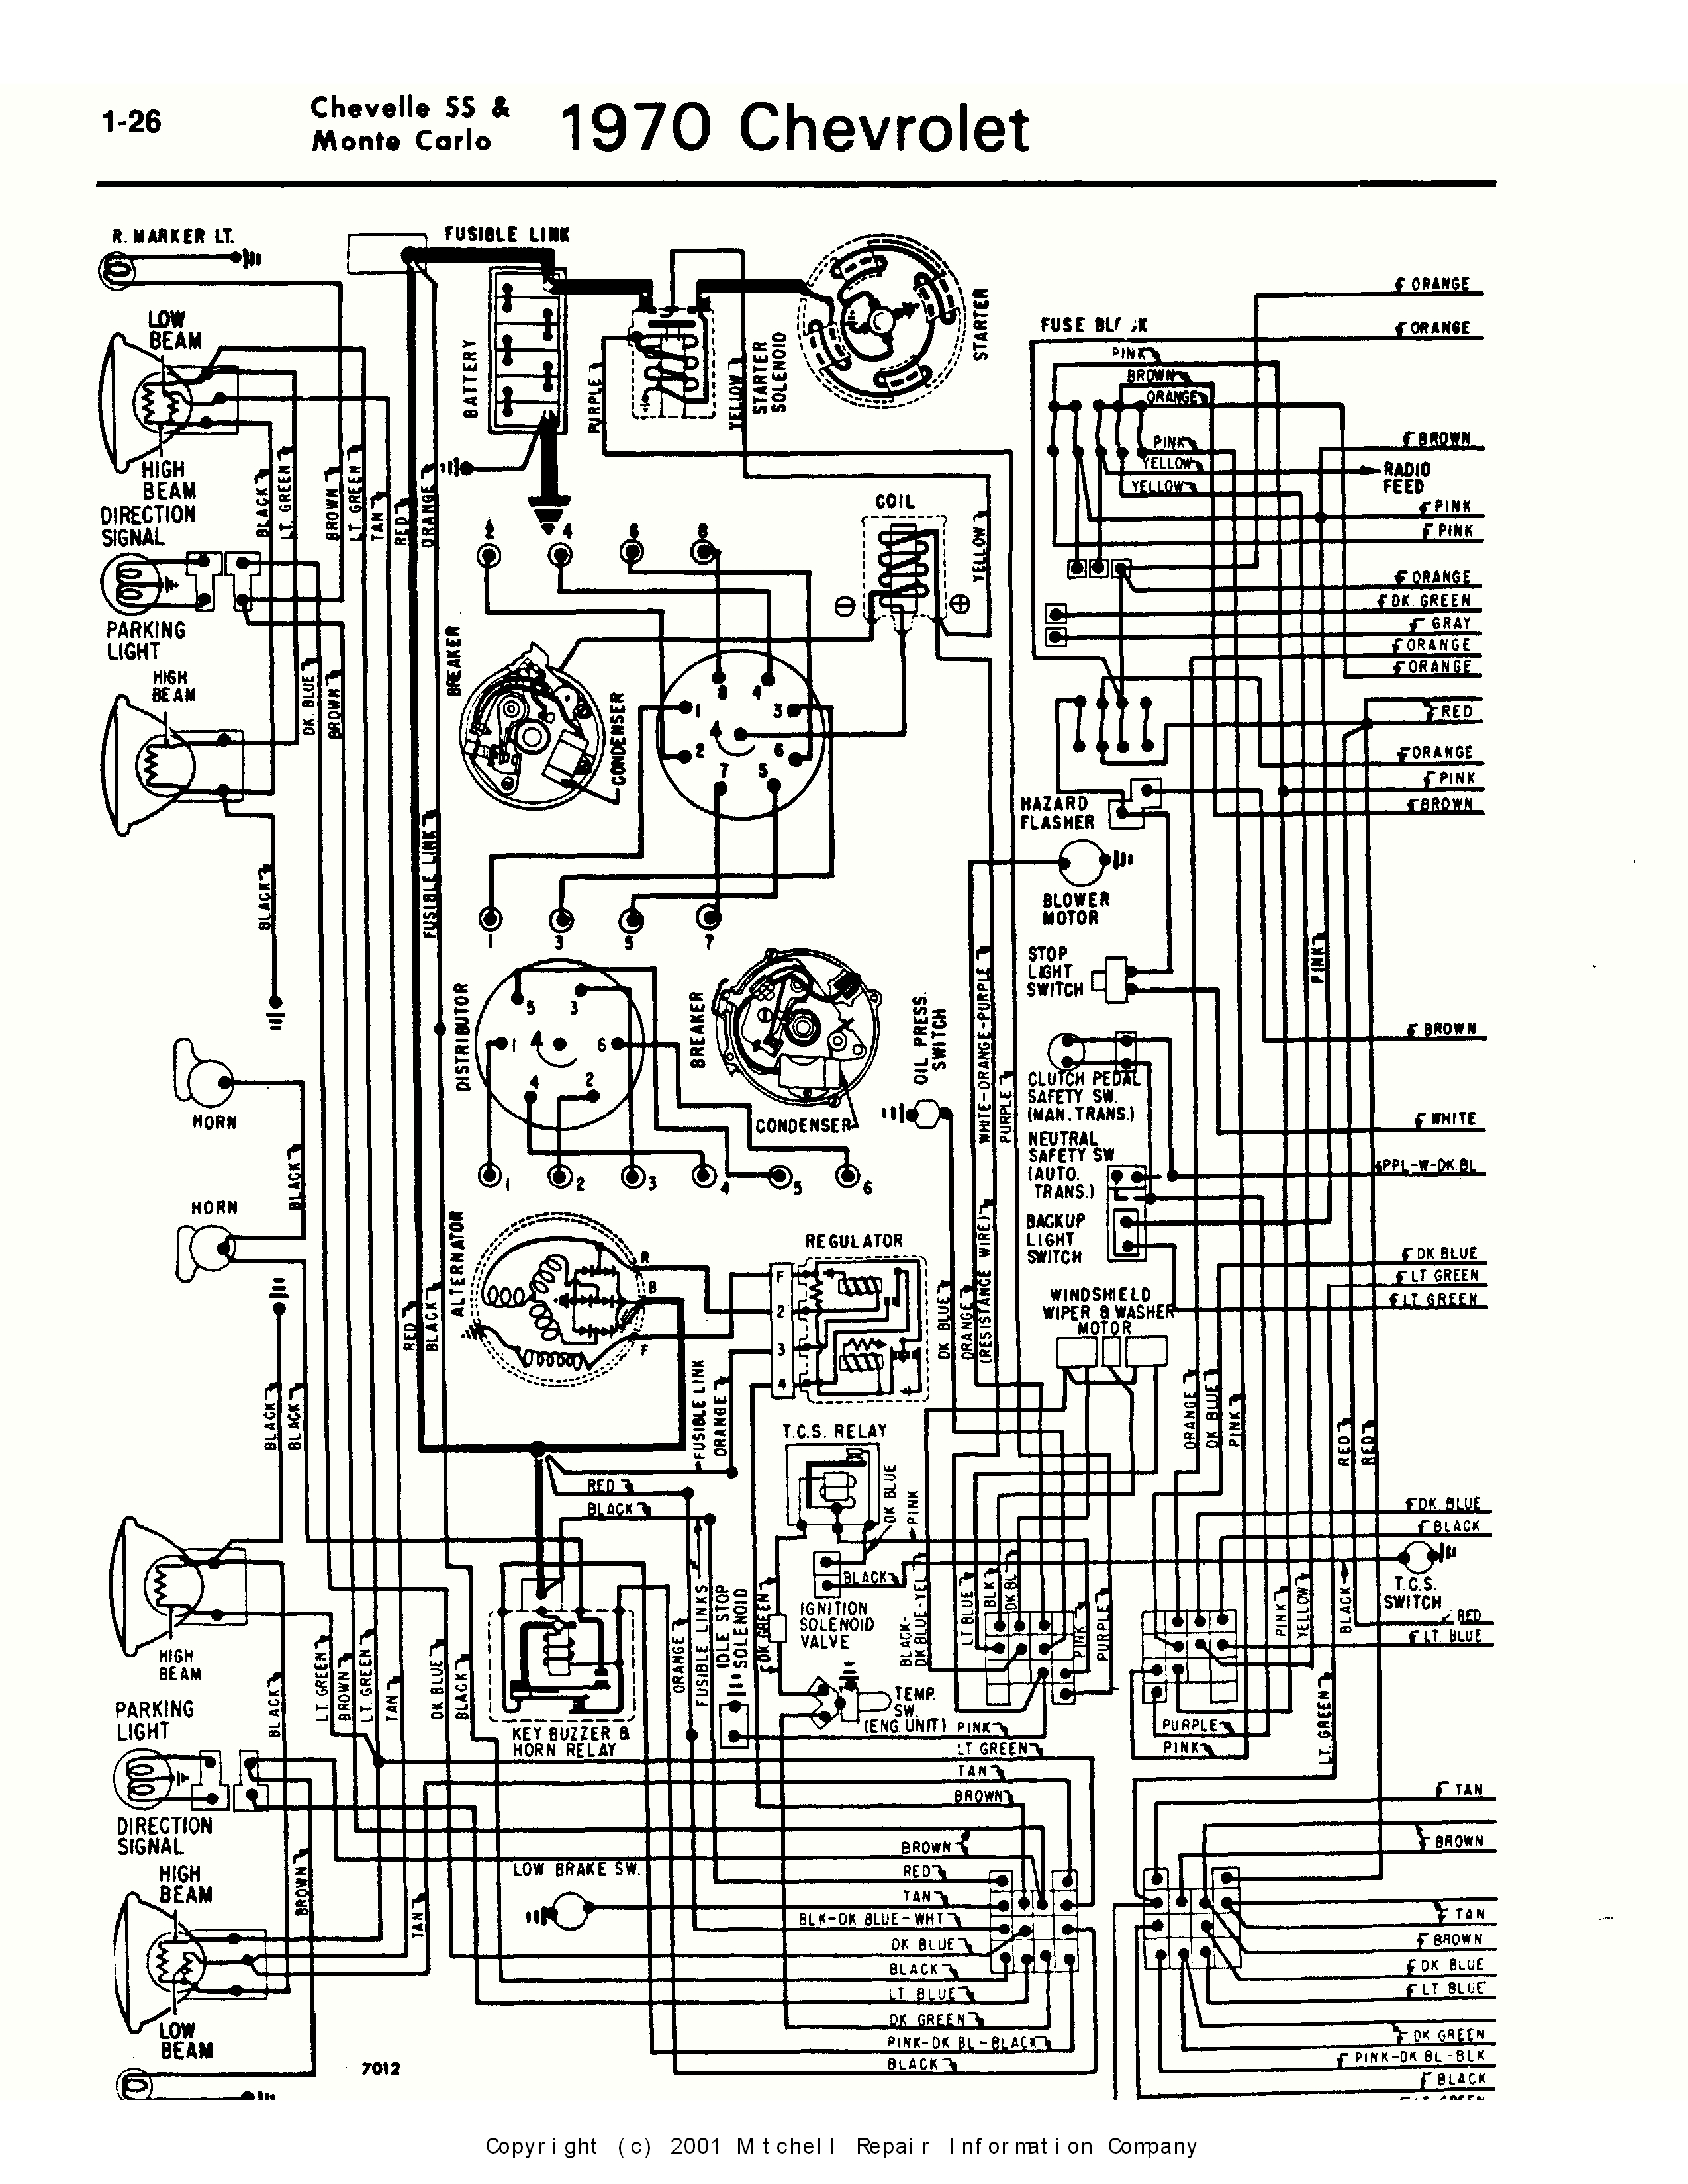 1994 Cadillac Seville Starter Wiring Diagram from www.wiring-wizard.com